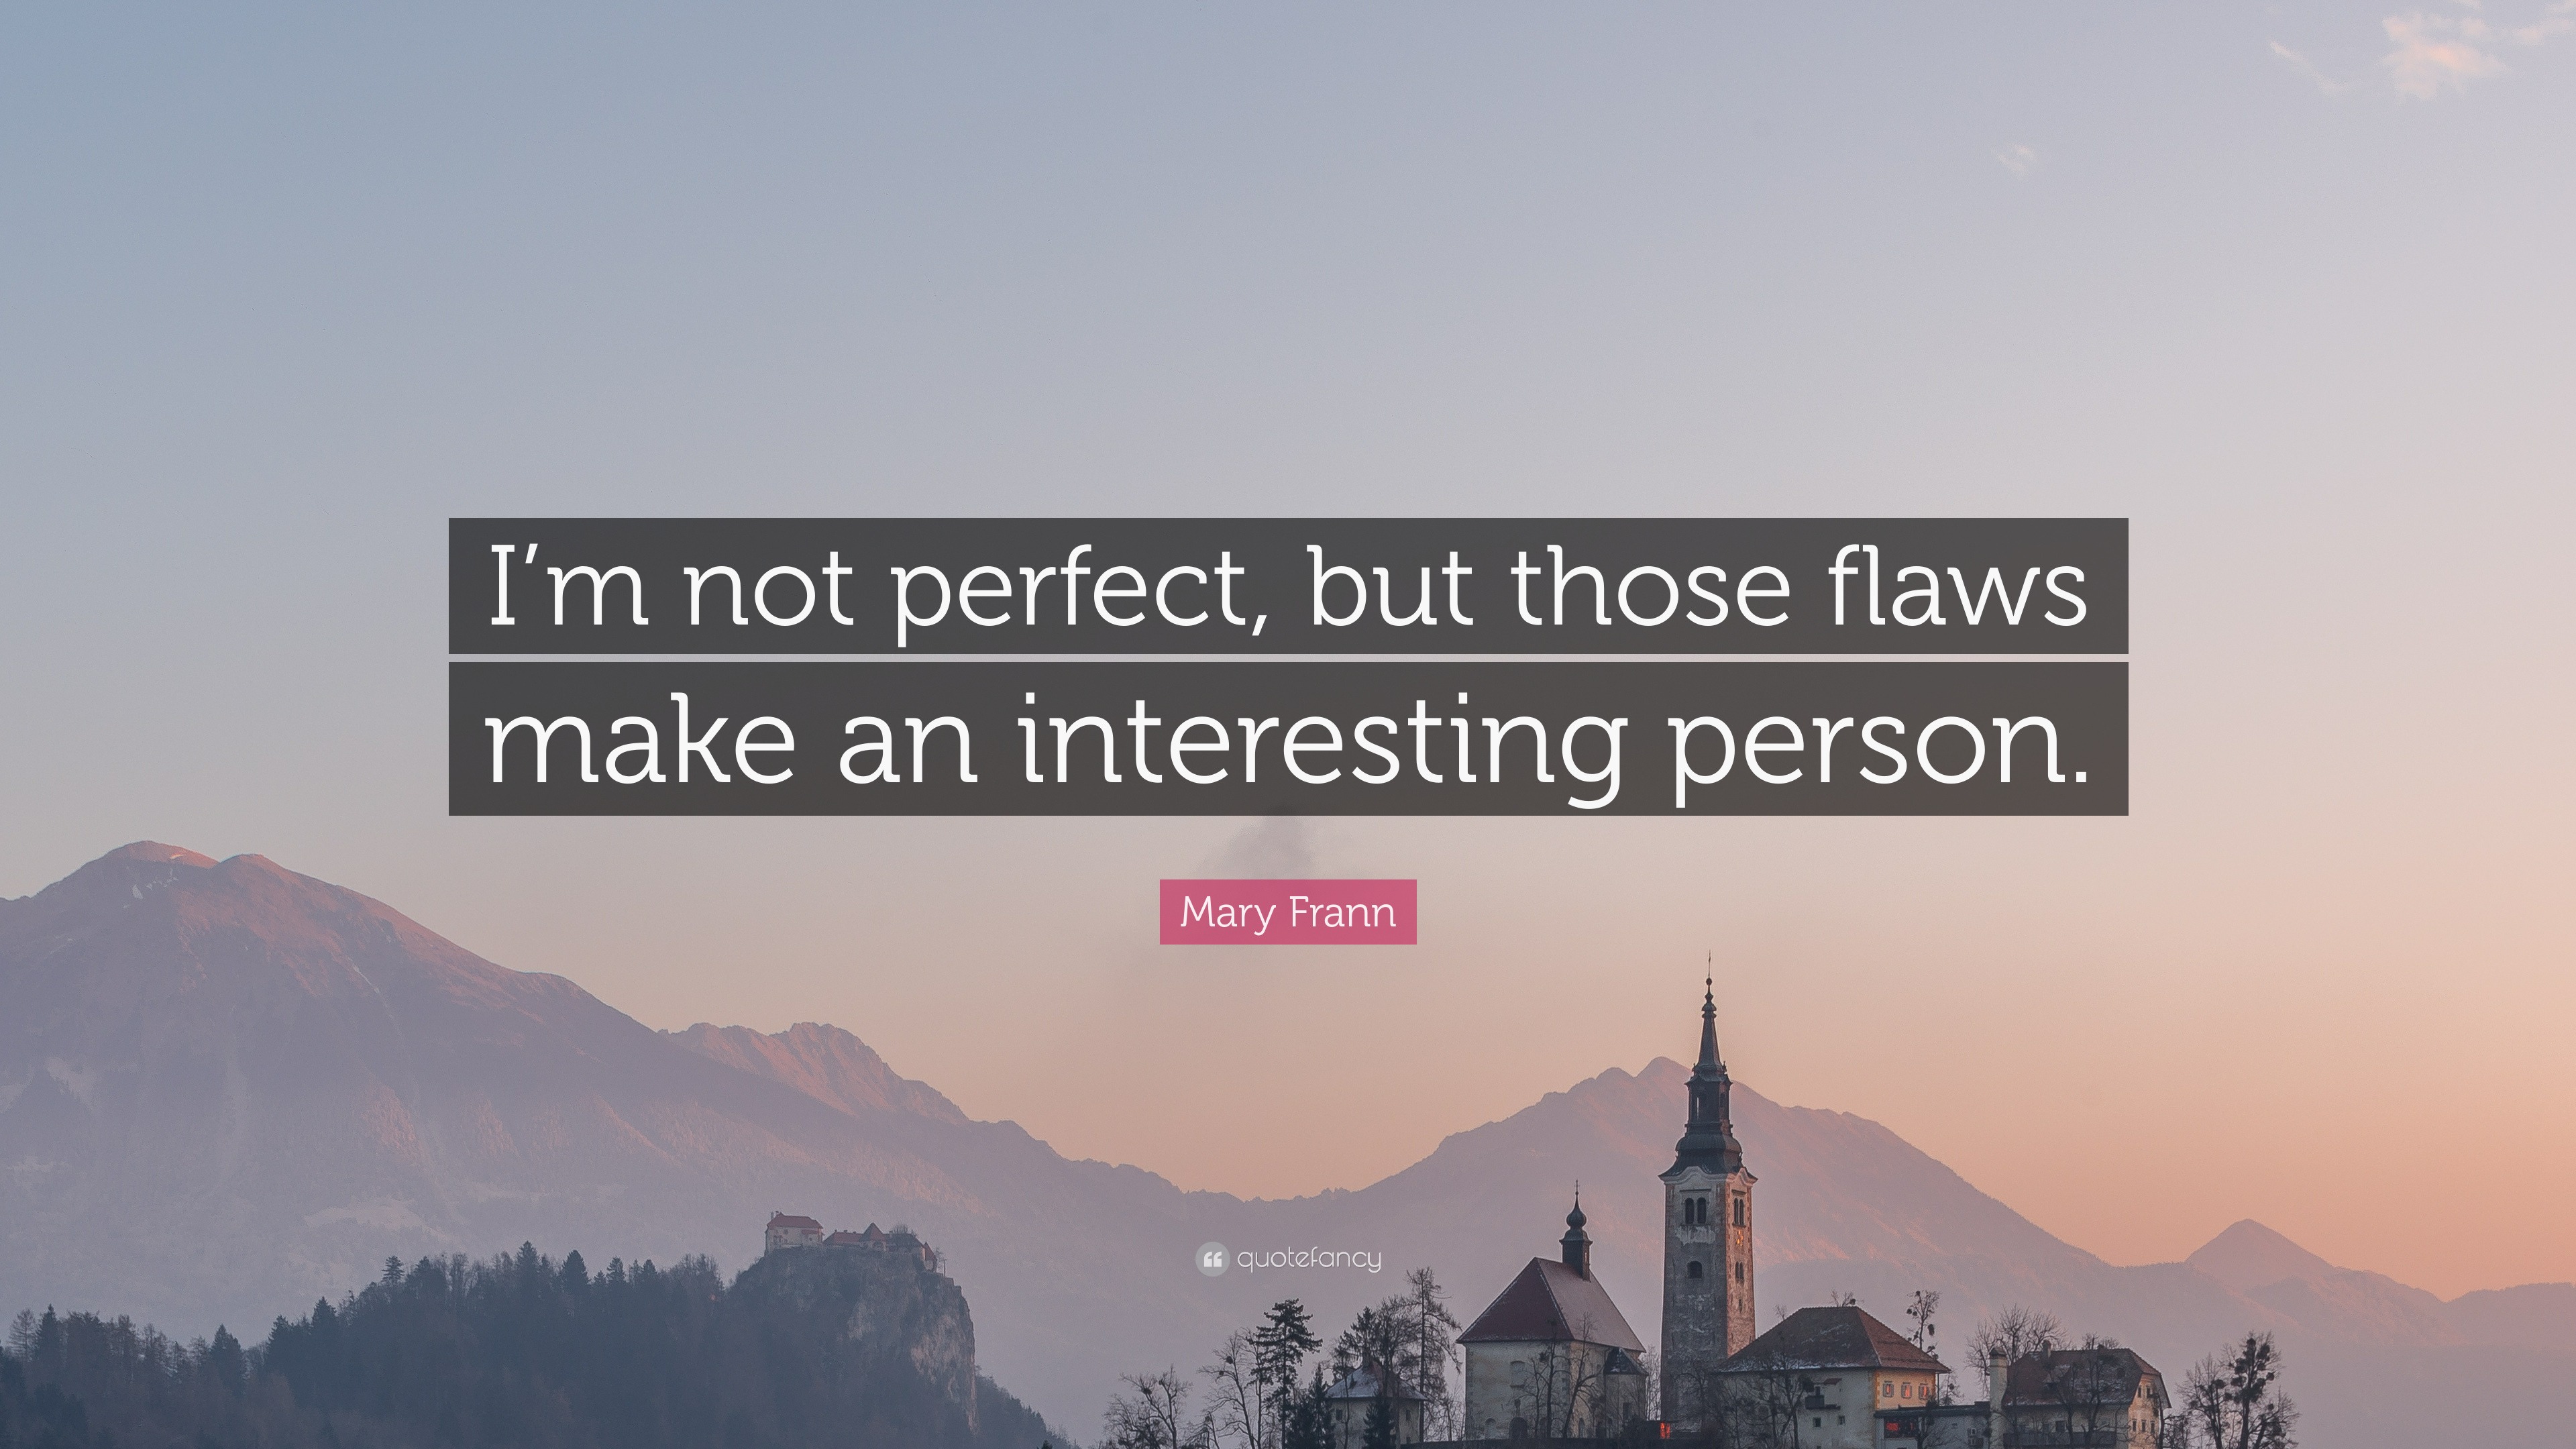 Mary Frann Quote “im Not Perfect But Those Flaws Make An Interesting Person”